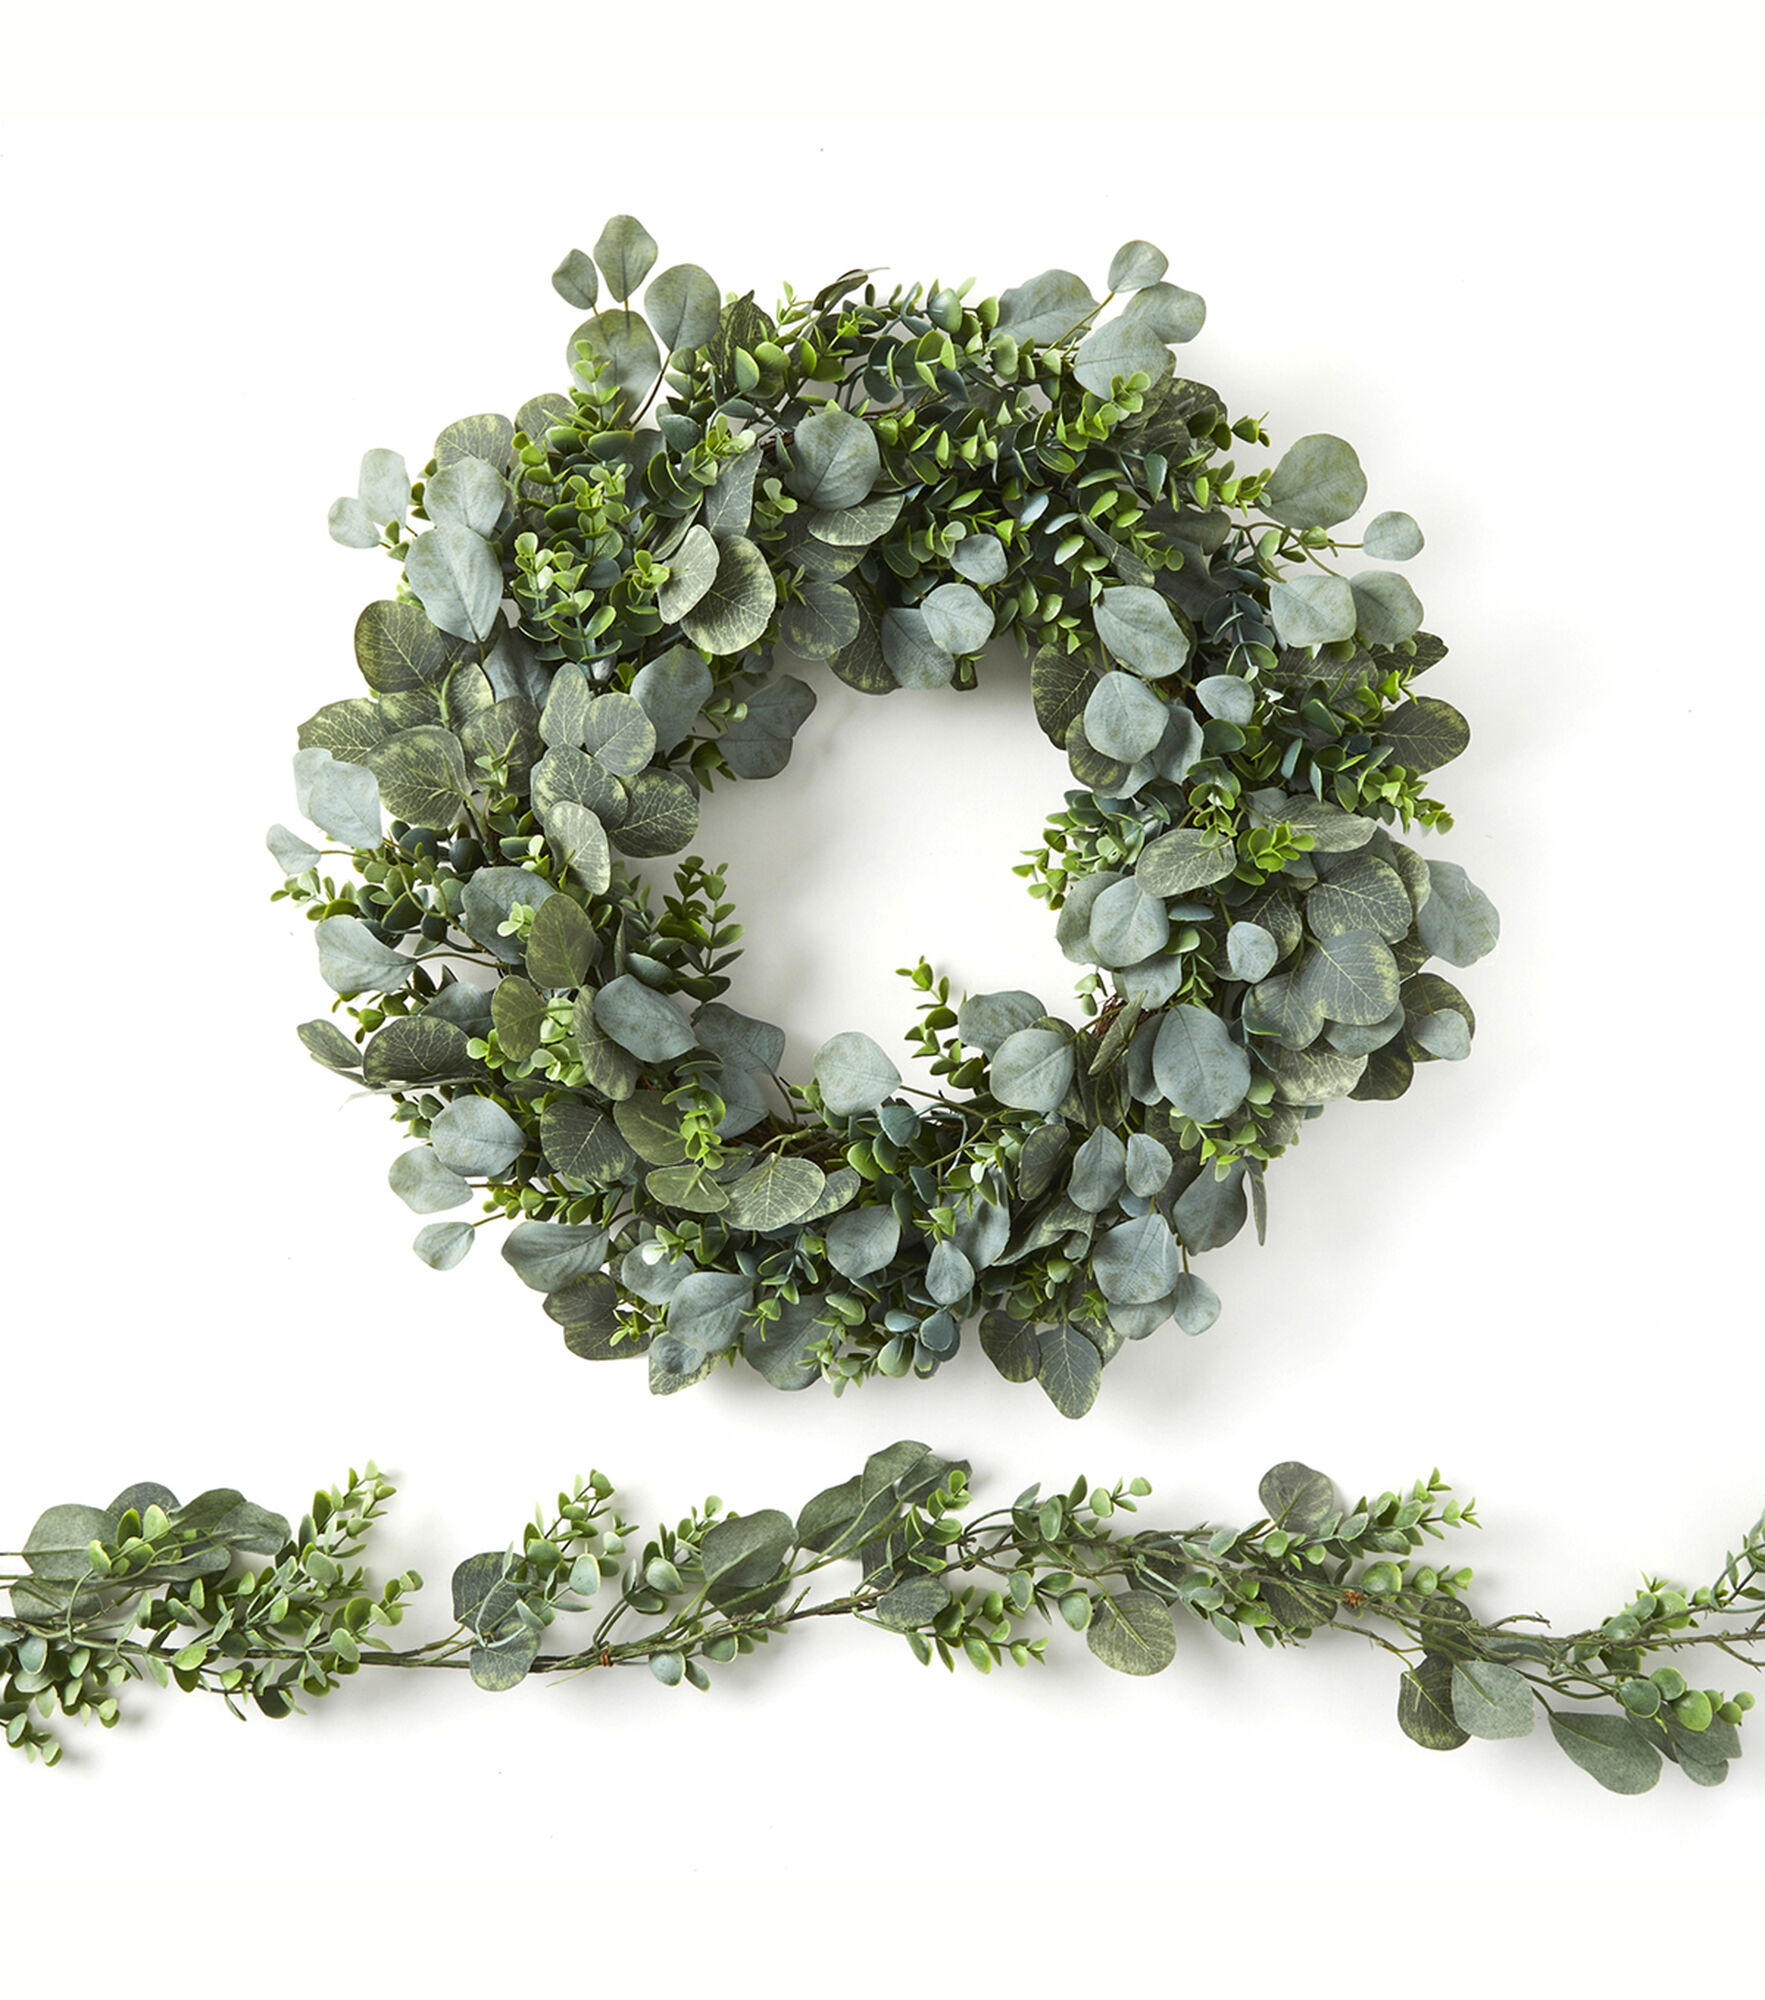 70 White Baby's Breath Garland by Bloom Room